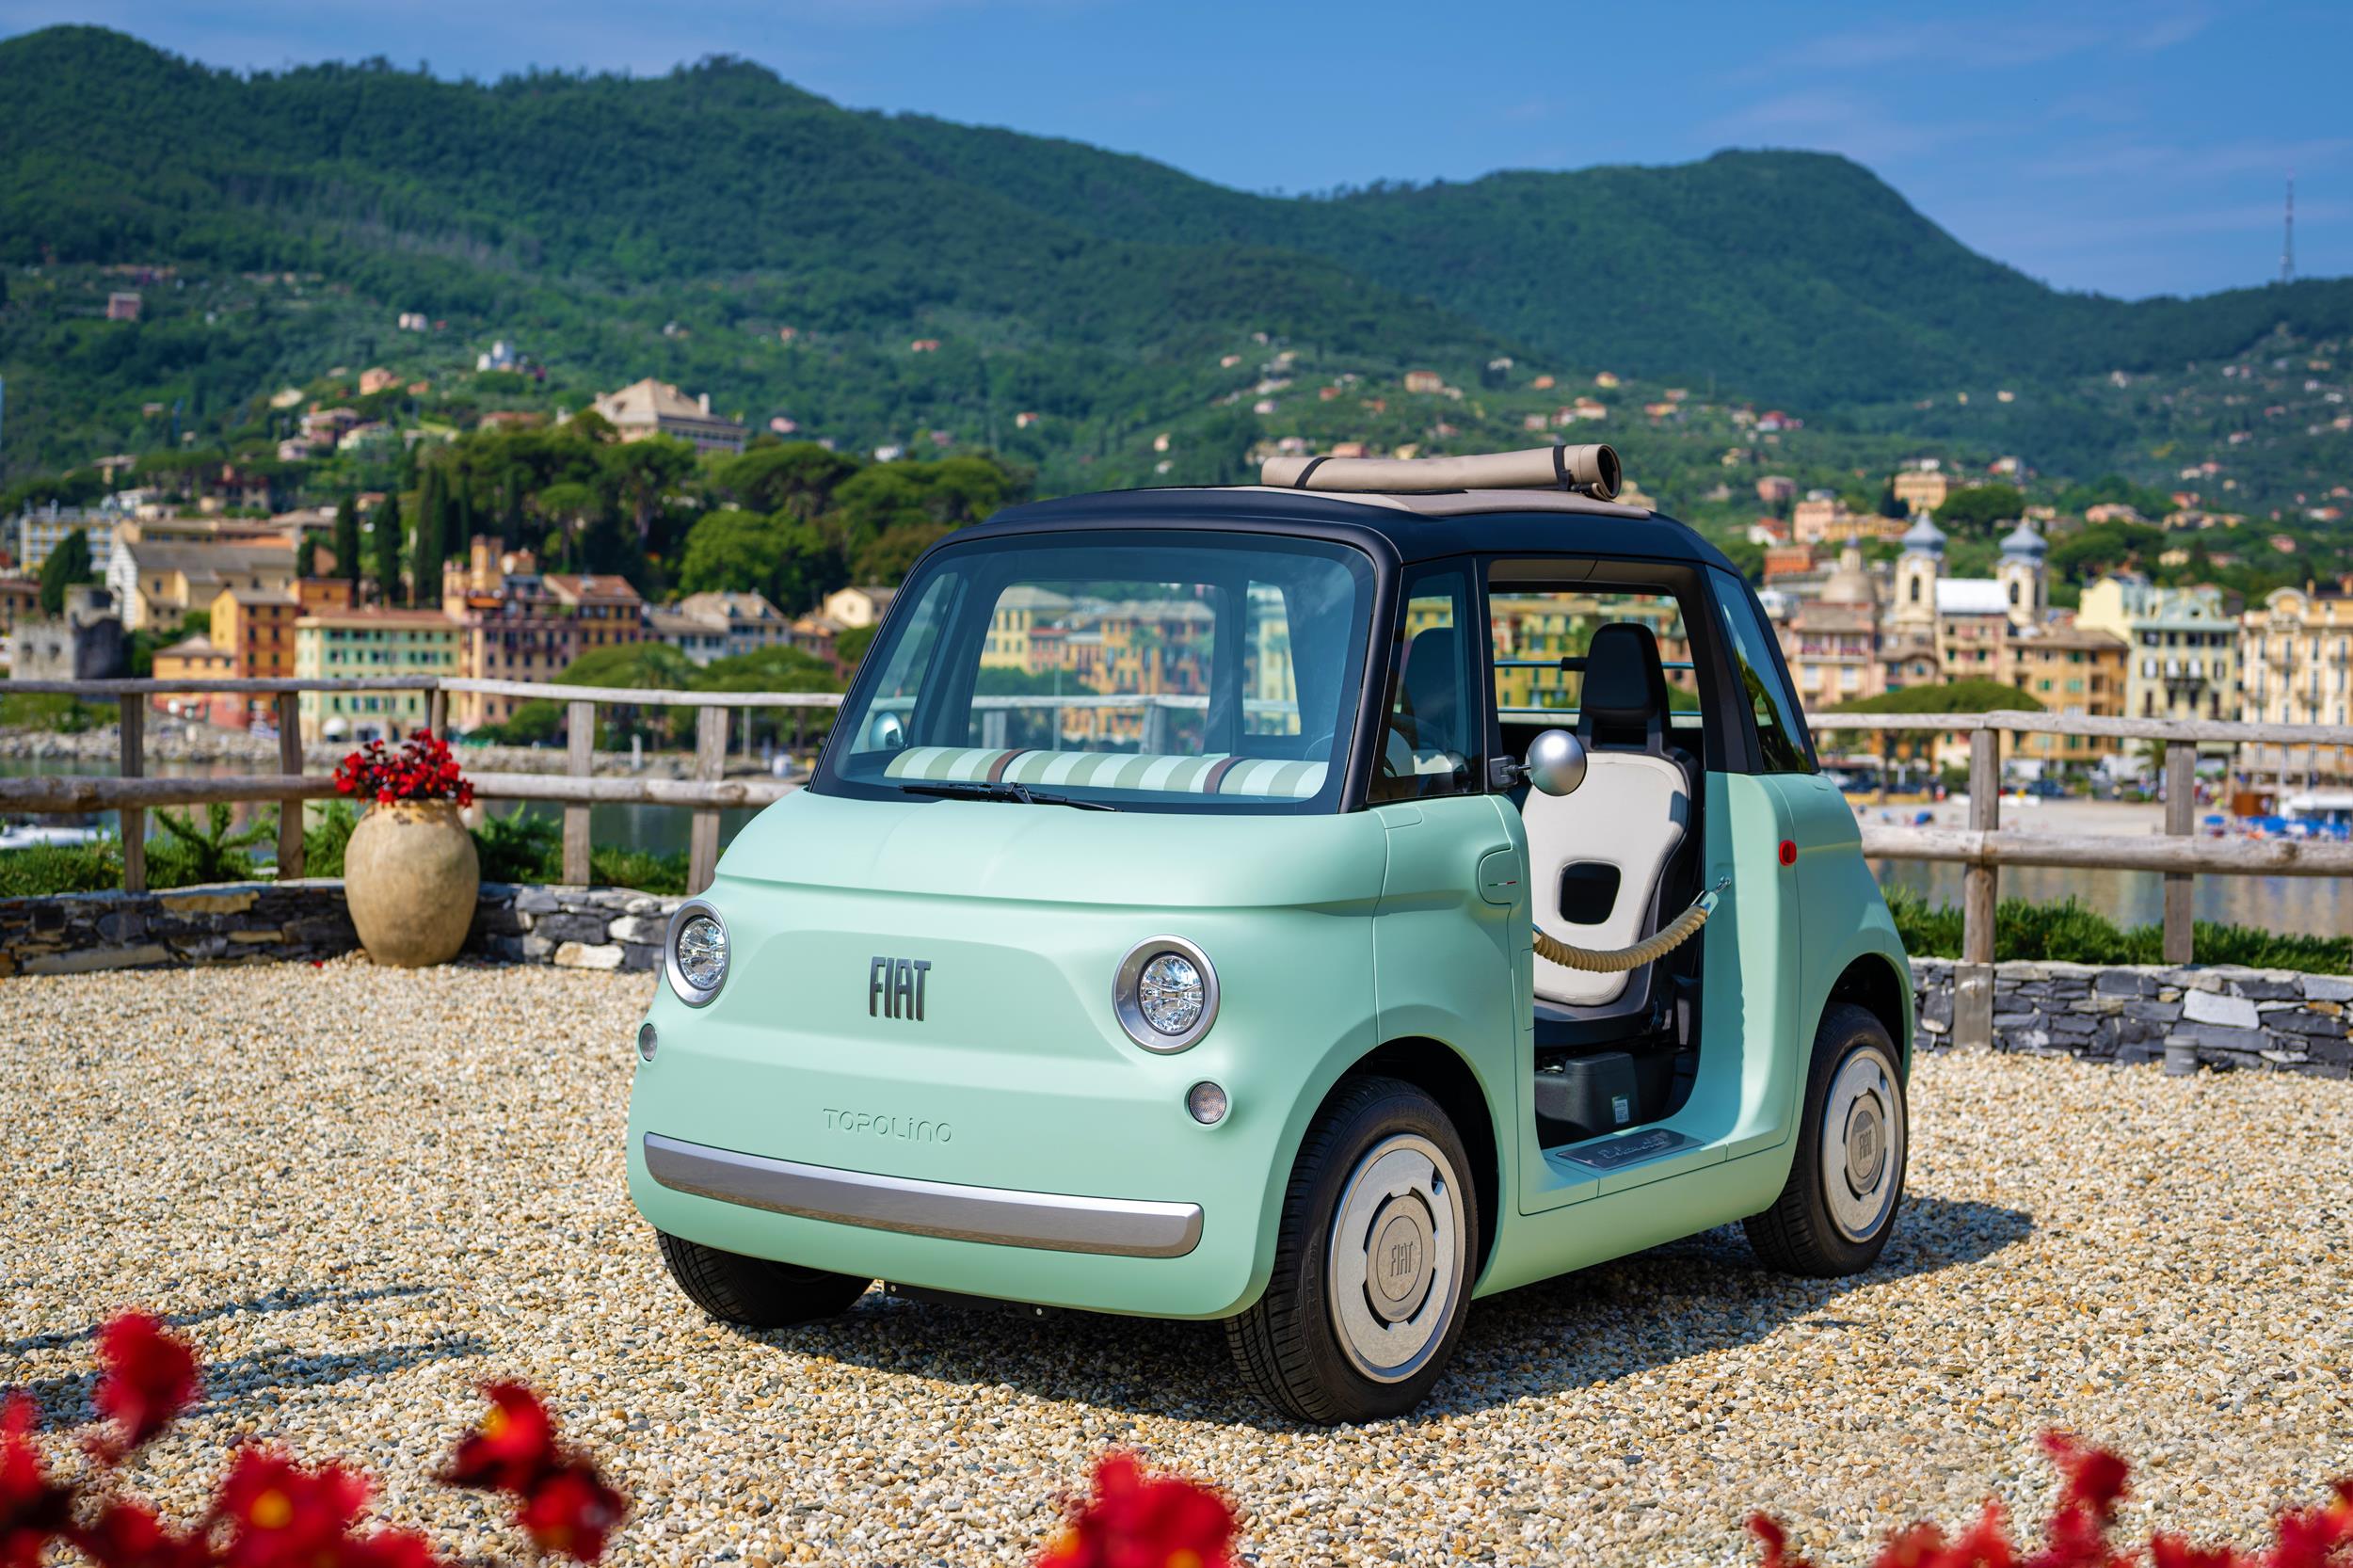 The New Fiat Topolino: the cutest way to electrify cities